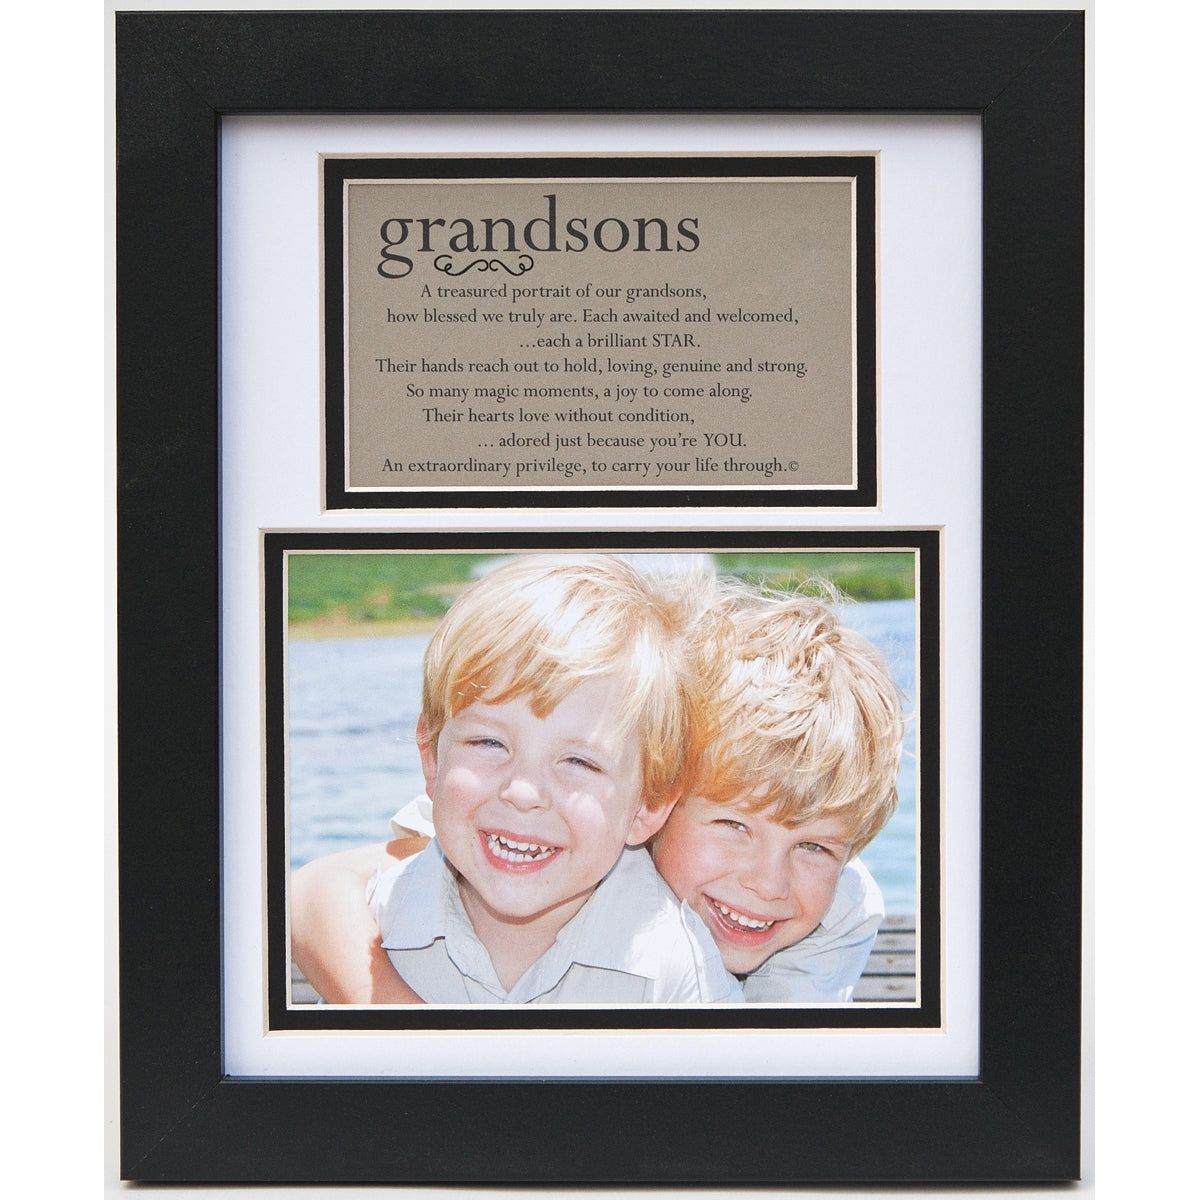 8x10 black frame with white and black double mat, includes &quot;Grandsons&quot; poem and space for photo.